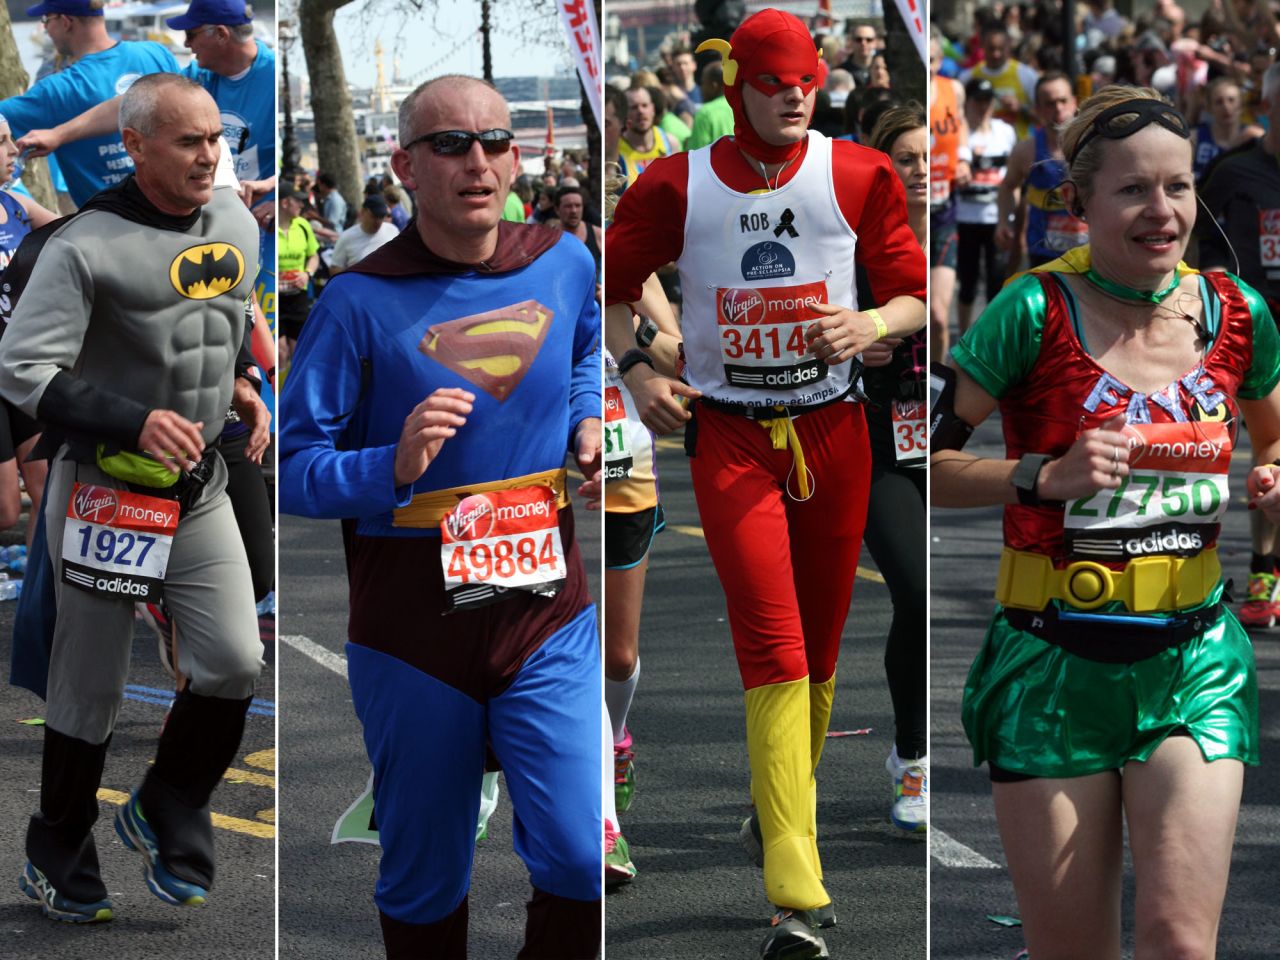 Fancy dress runners compete on April 21 in the London Marathon which started in East London before traveling into the city, along the River Thames and finishing near Buckingham Palace. 